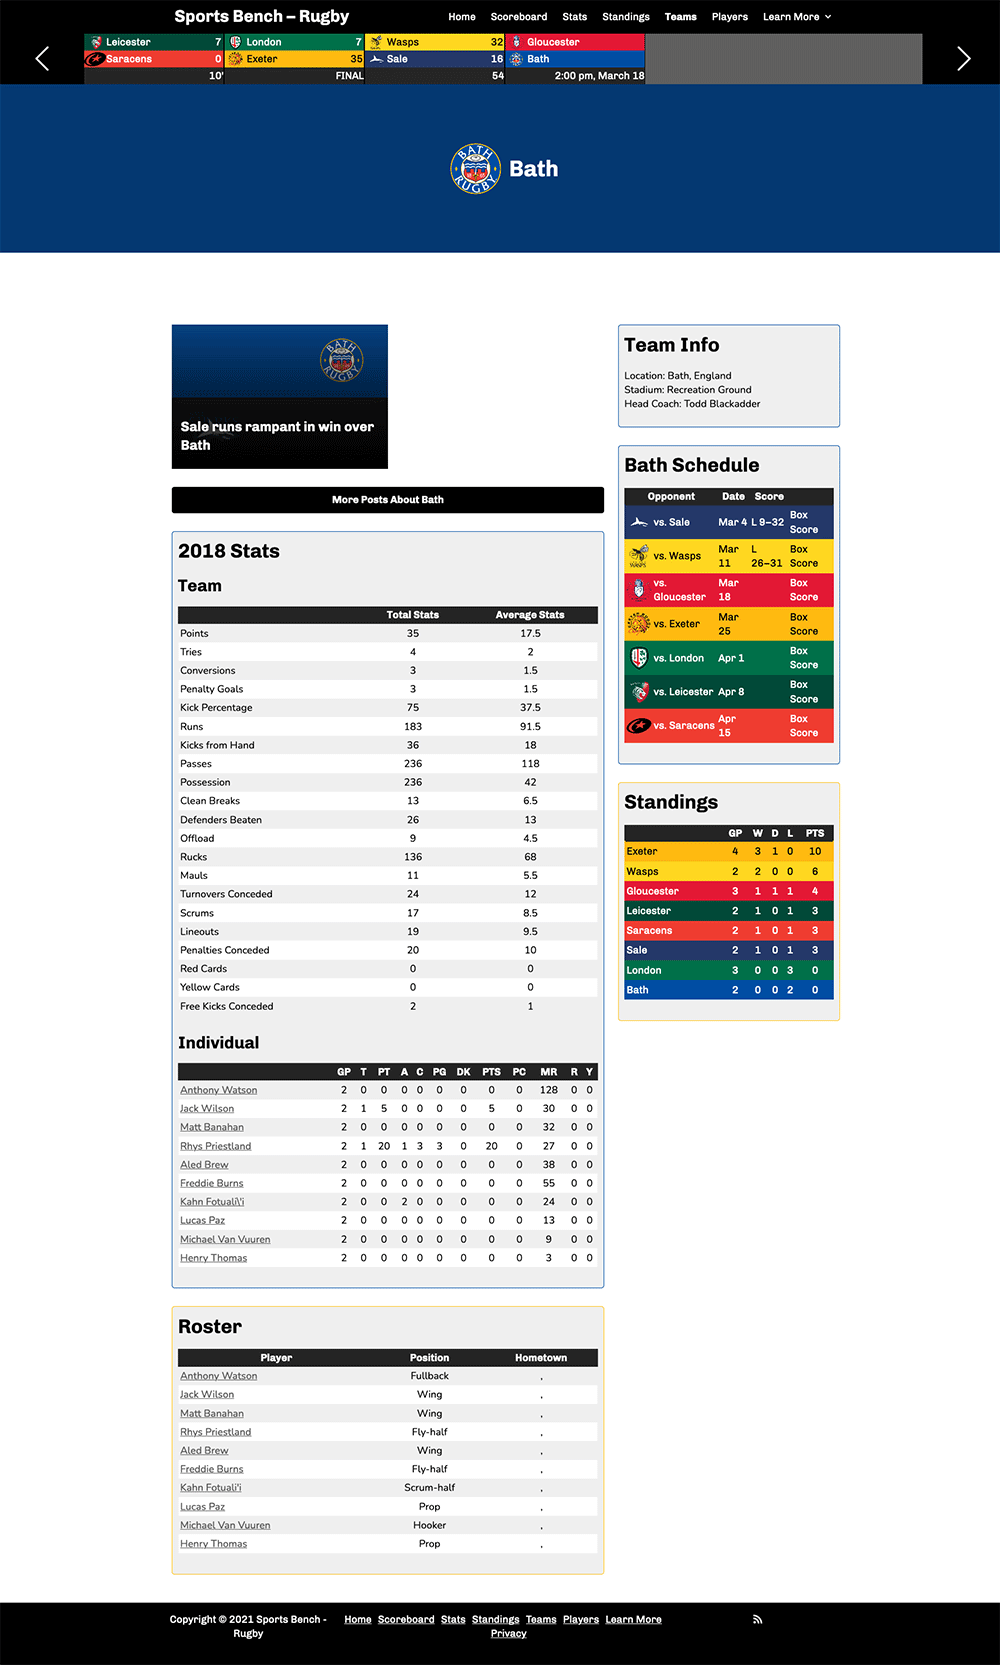 Screenshot of the rugby single team page in Sports Bench